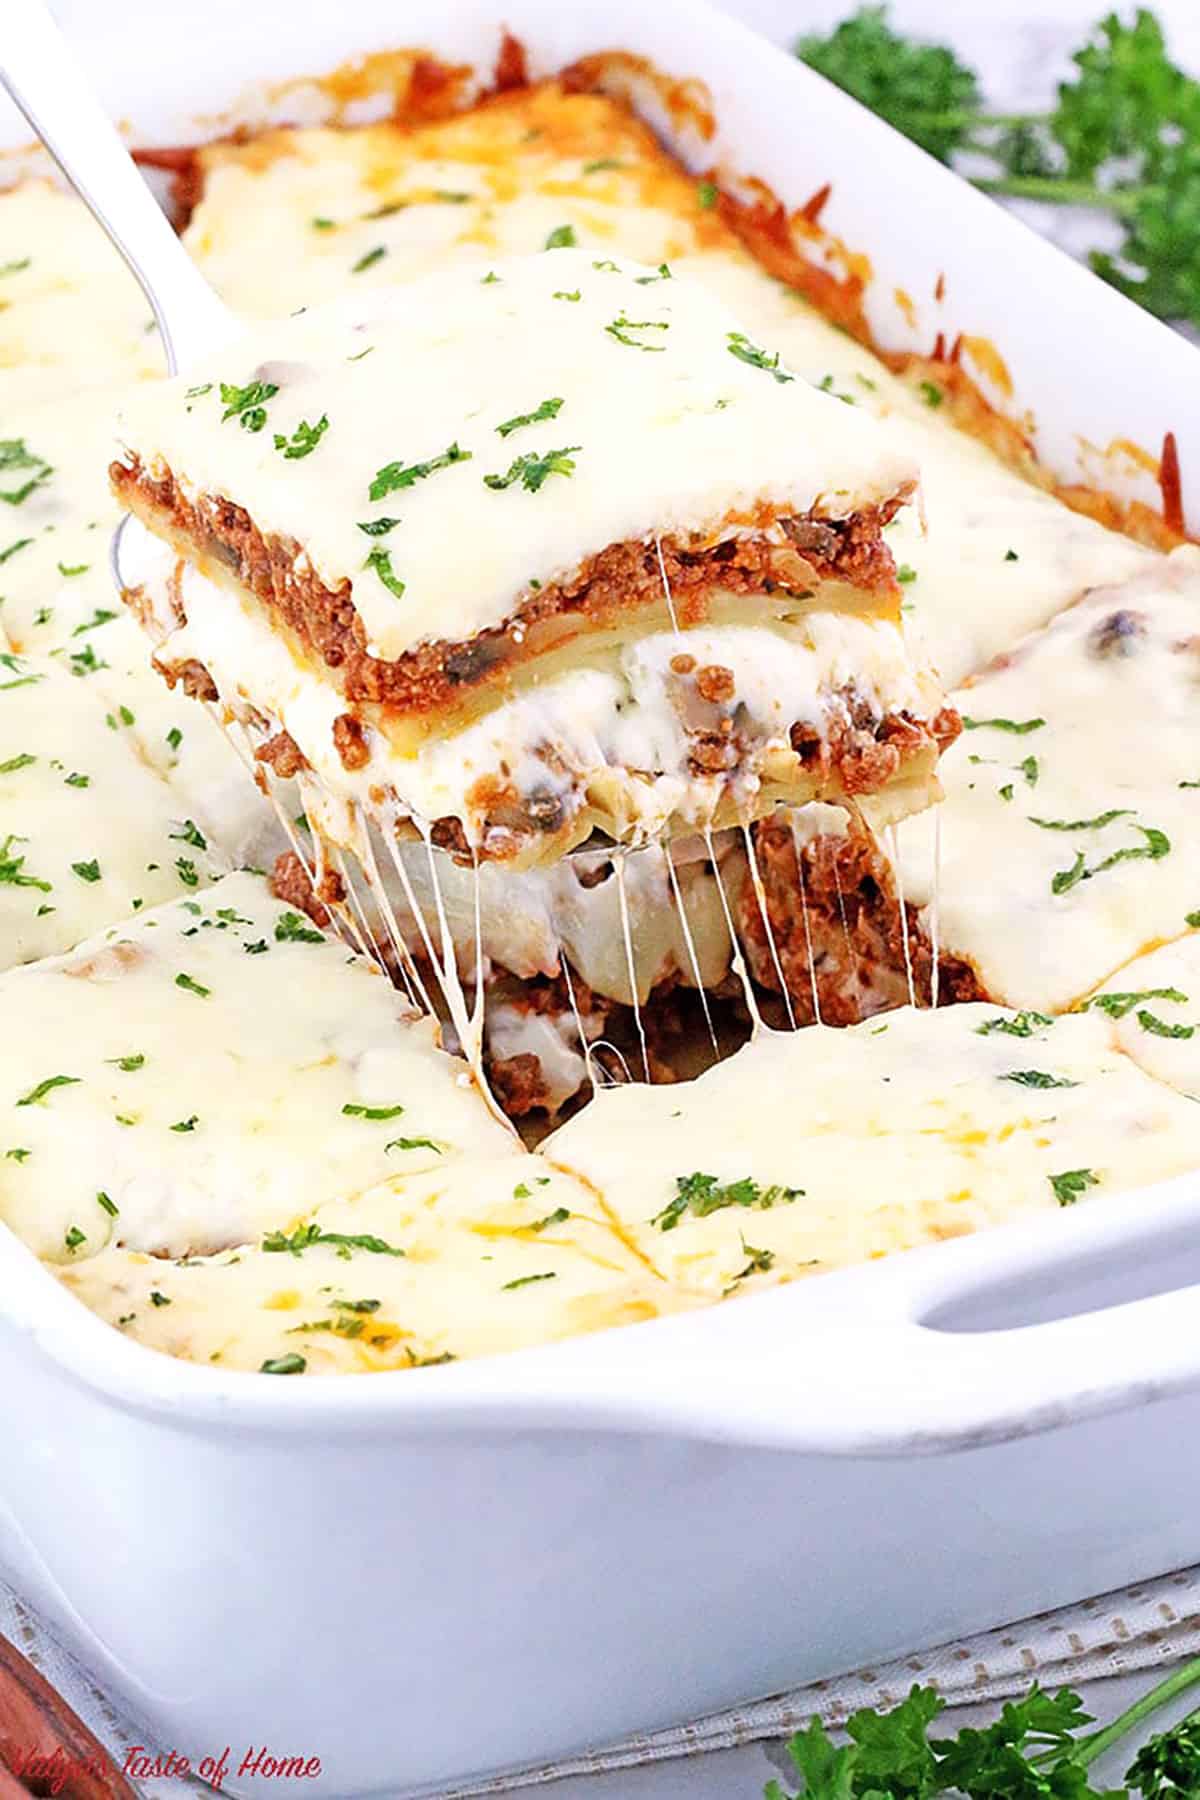 This Mushroom Lasagna features a delicious combination of mushroom and ground beef cooked in a tasty tomato-based sauce for a hearty, comforting dinner meal!